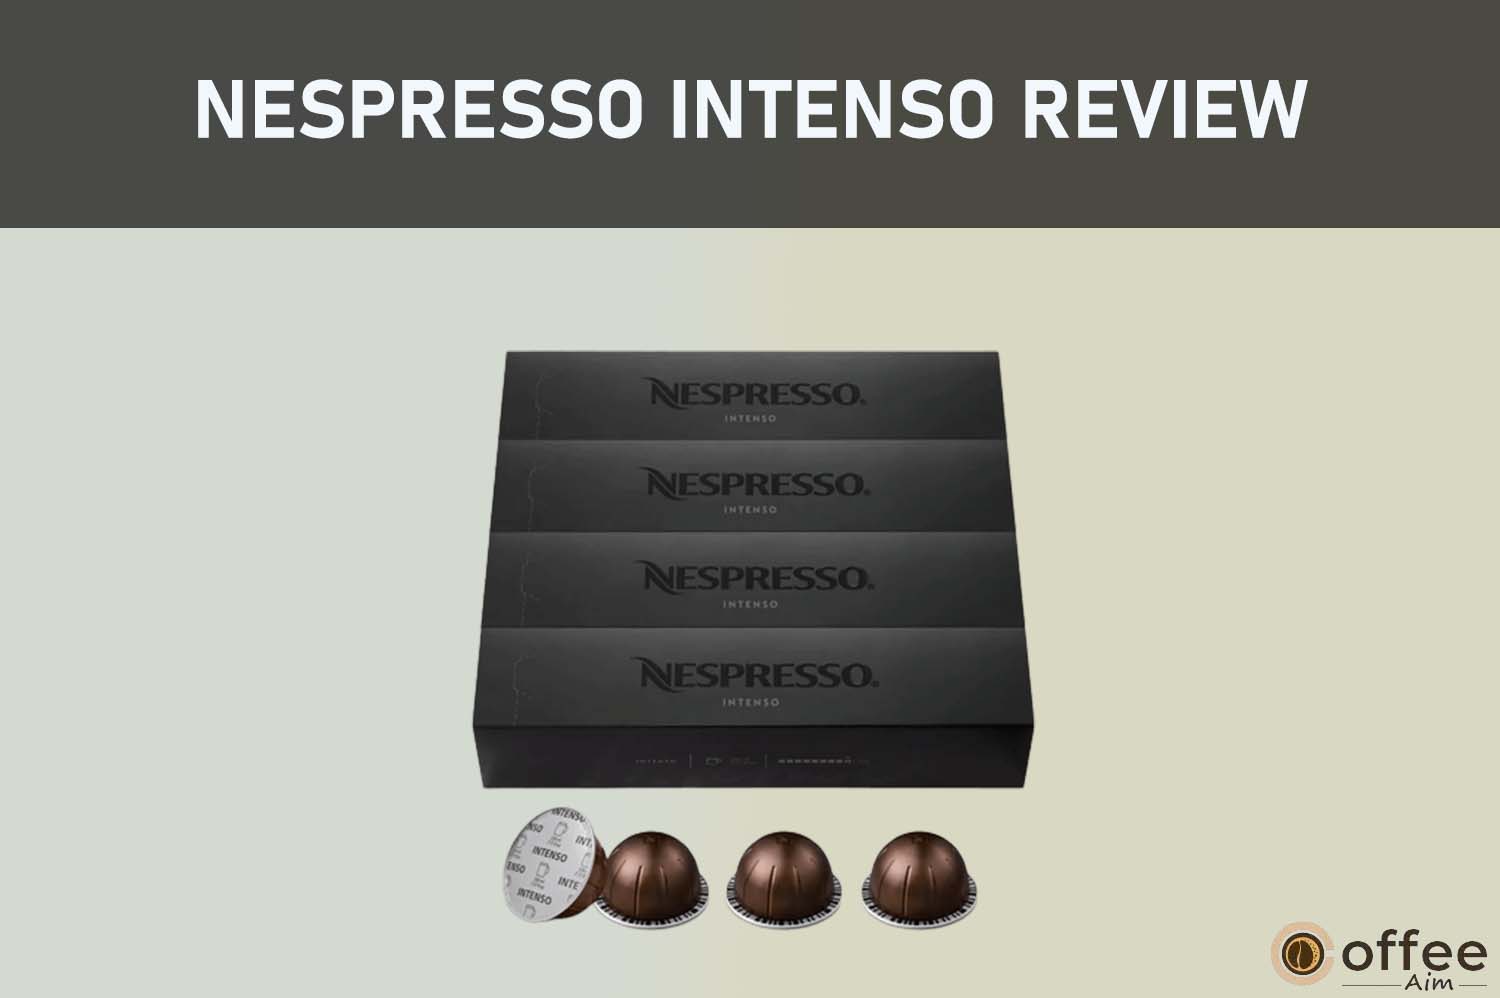 Featured image for the article "Nespresso Intenso Review"